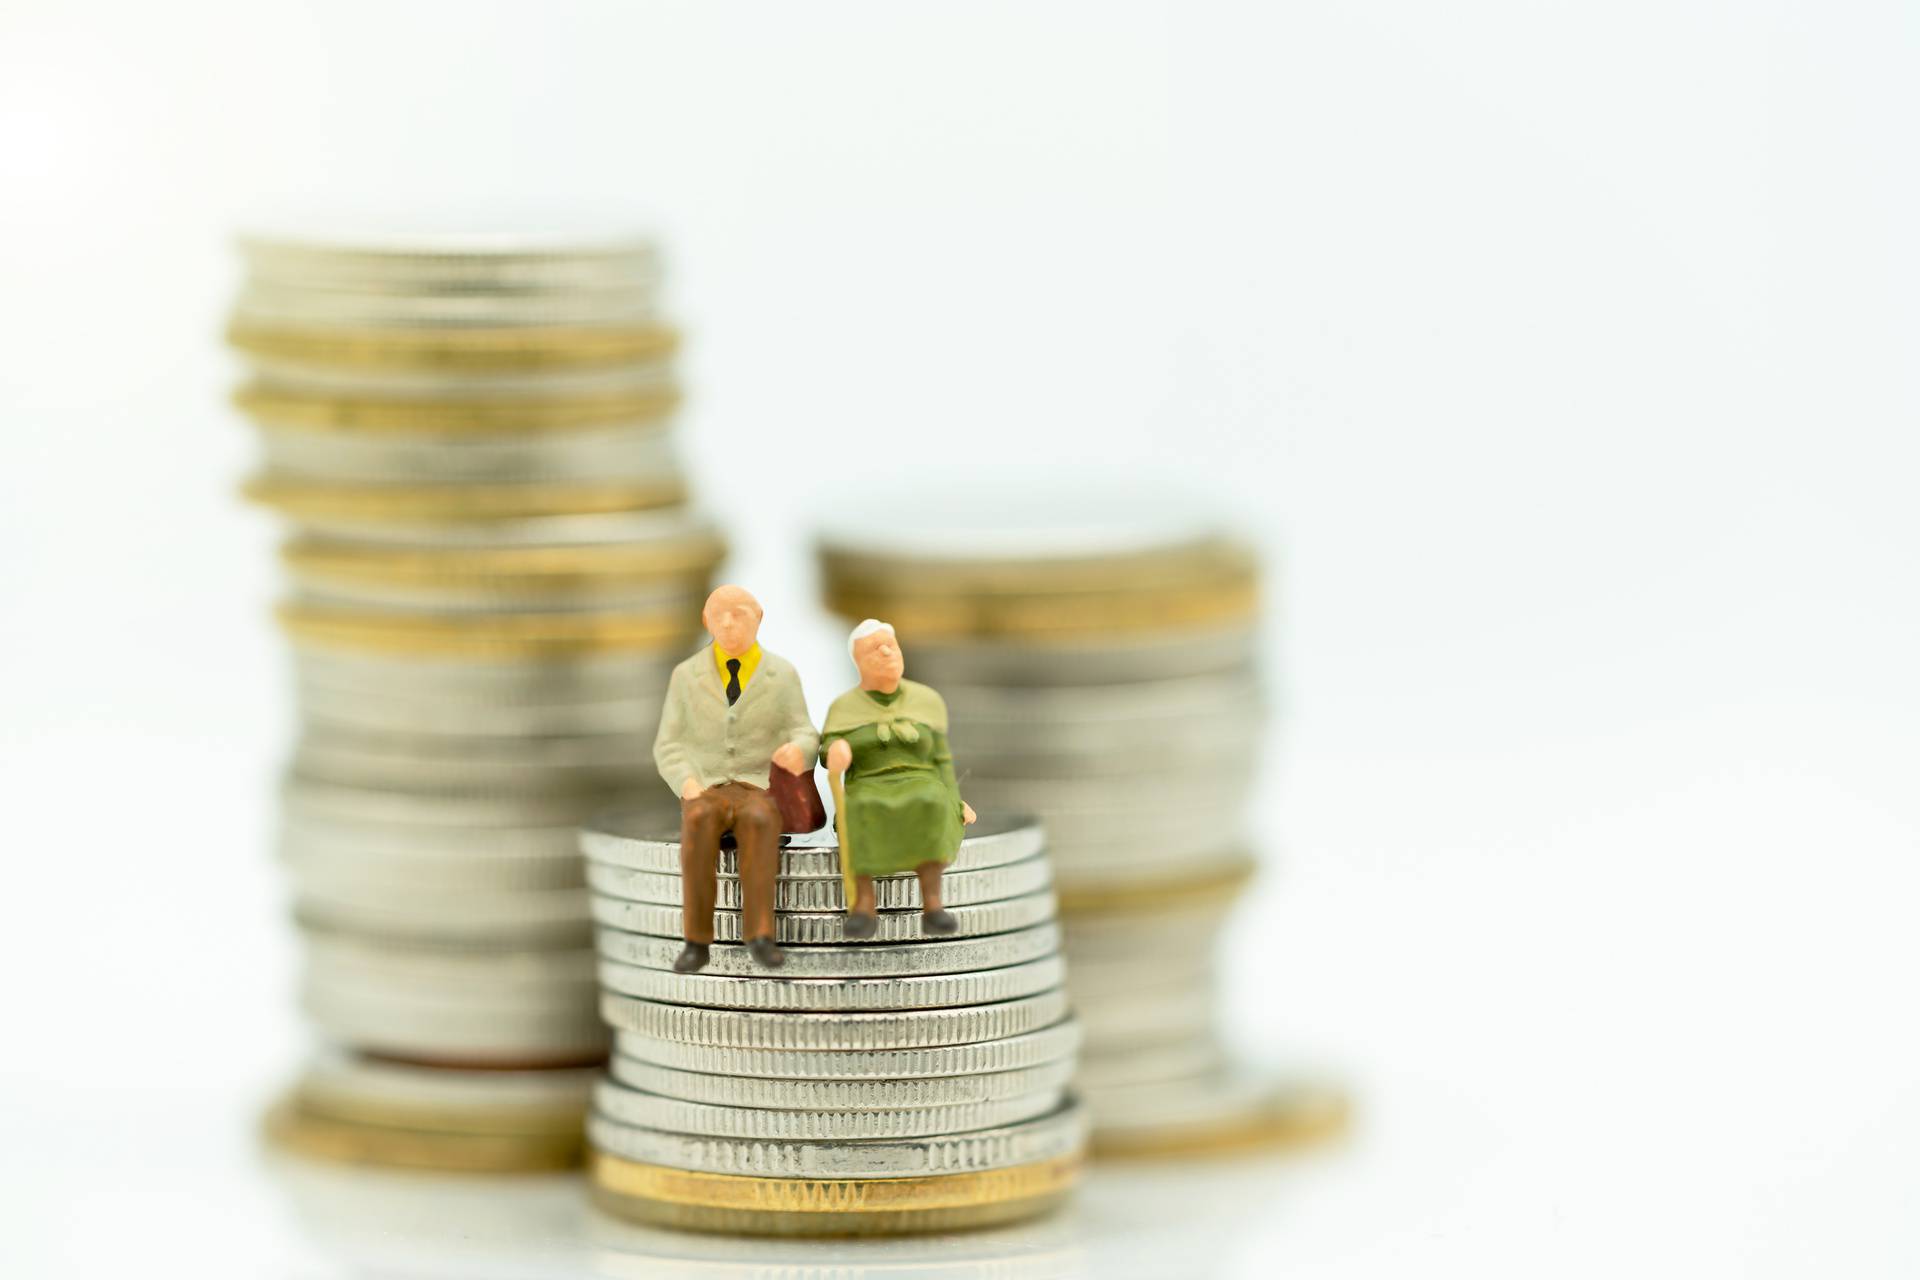 Miniature people: Happy old people standing on coins stack, Reti